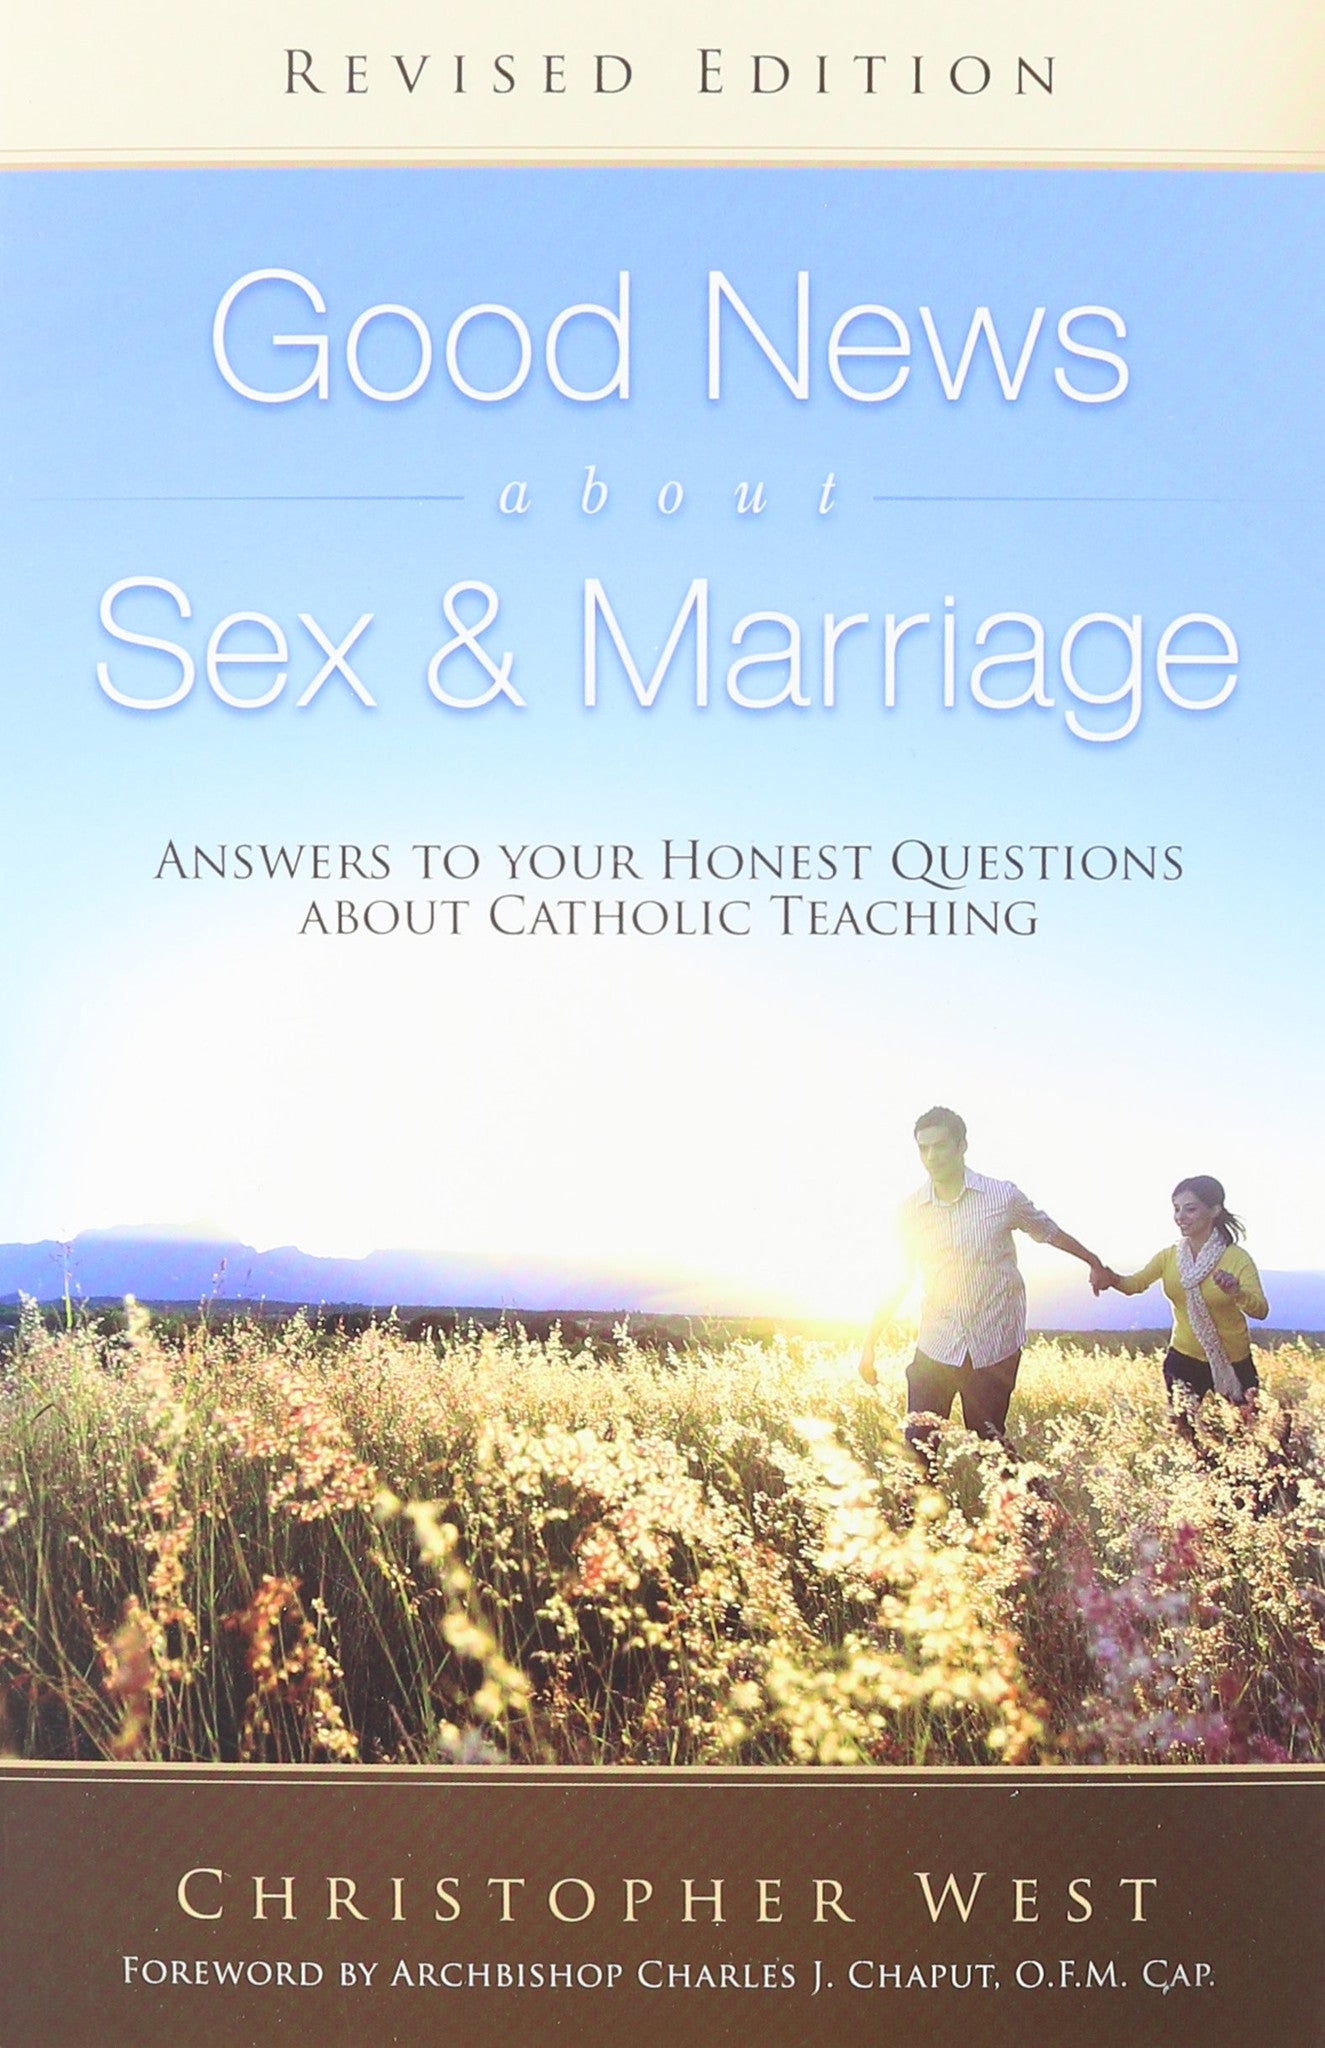 Good News About Sex & Marriage (Revised Edition)